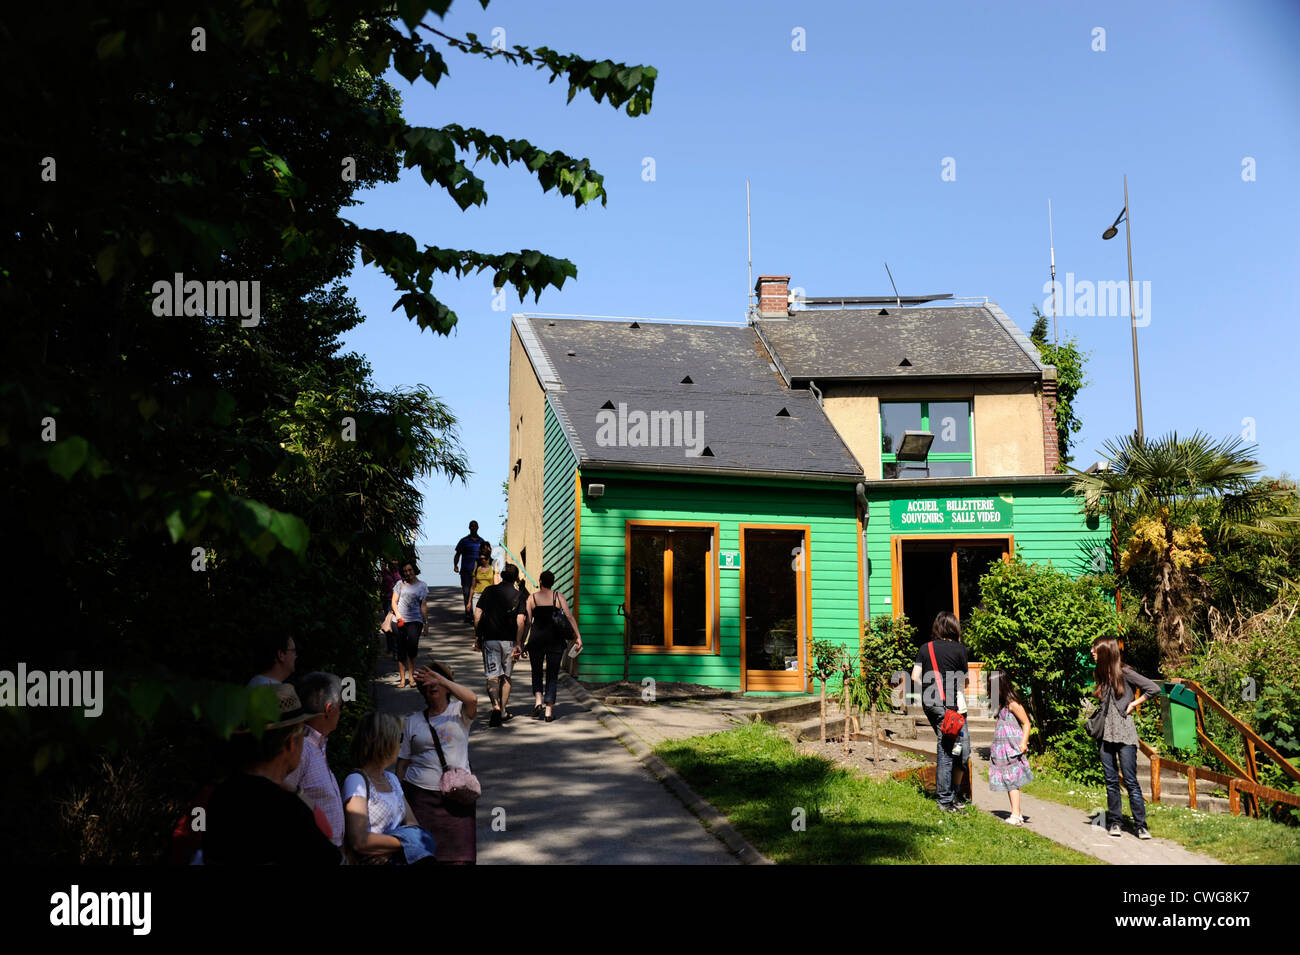 Les hortillonnages,Amiens,Somme,Picardie,France Stock Photo